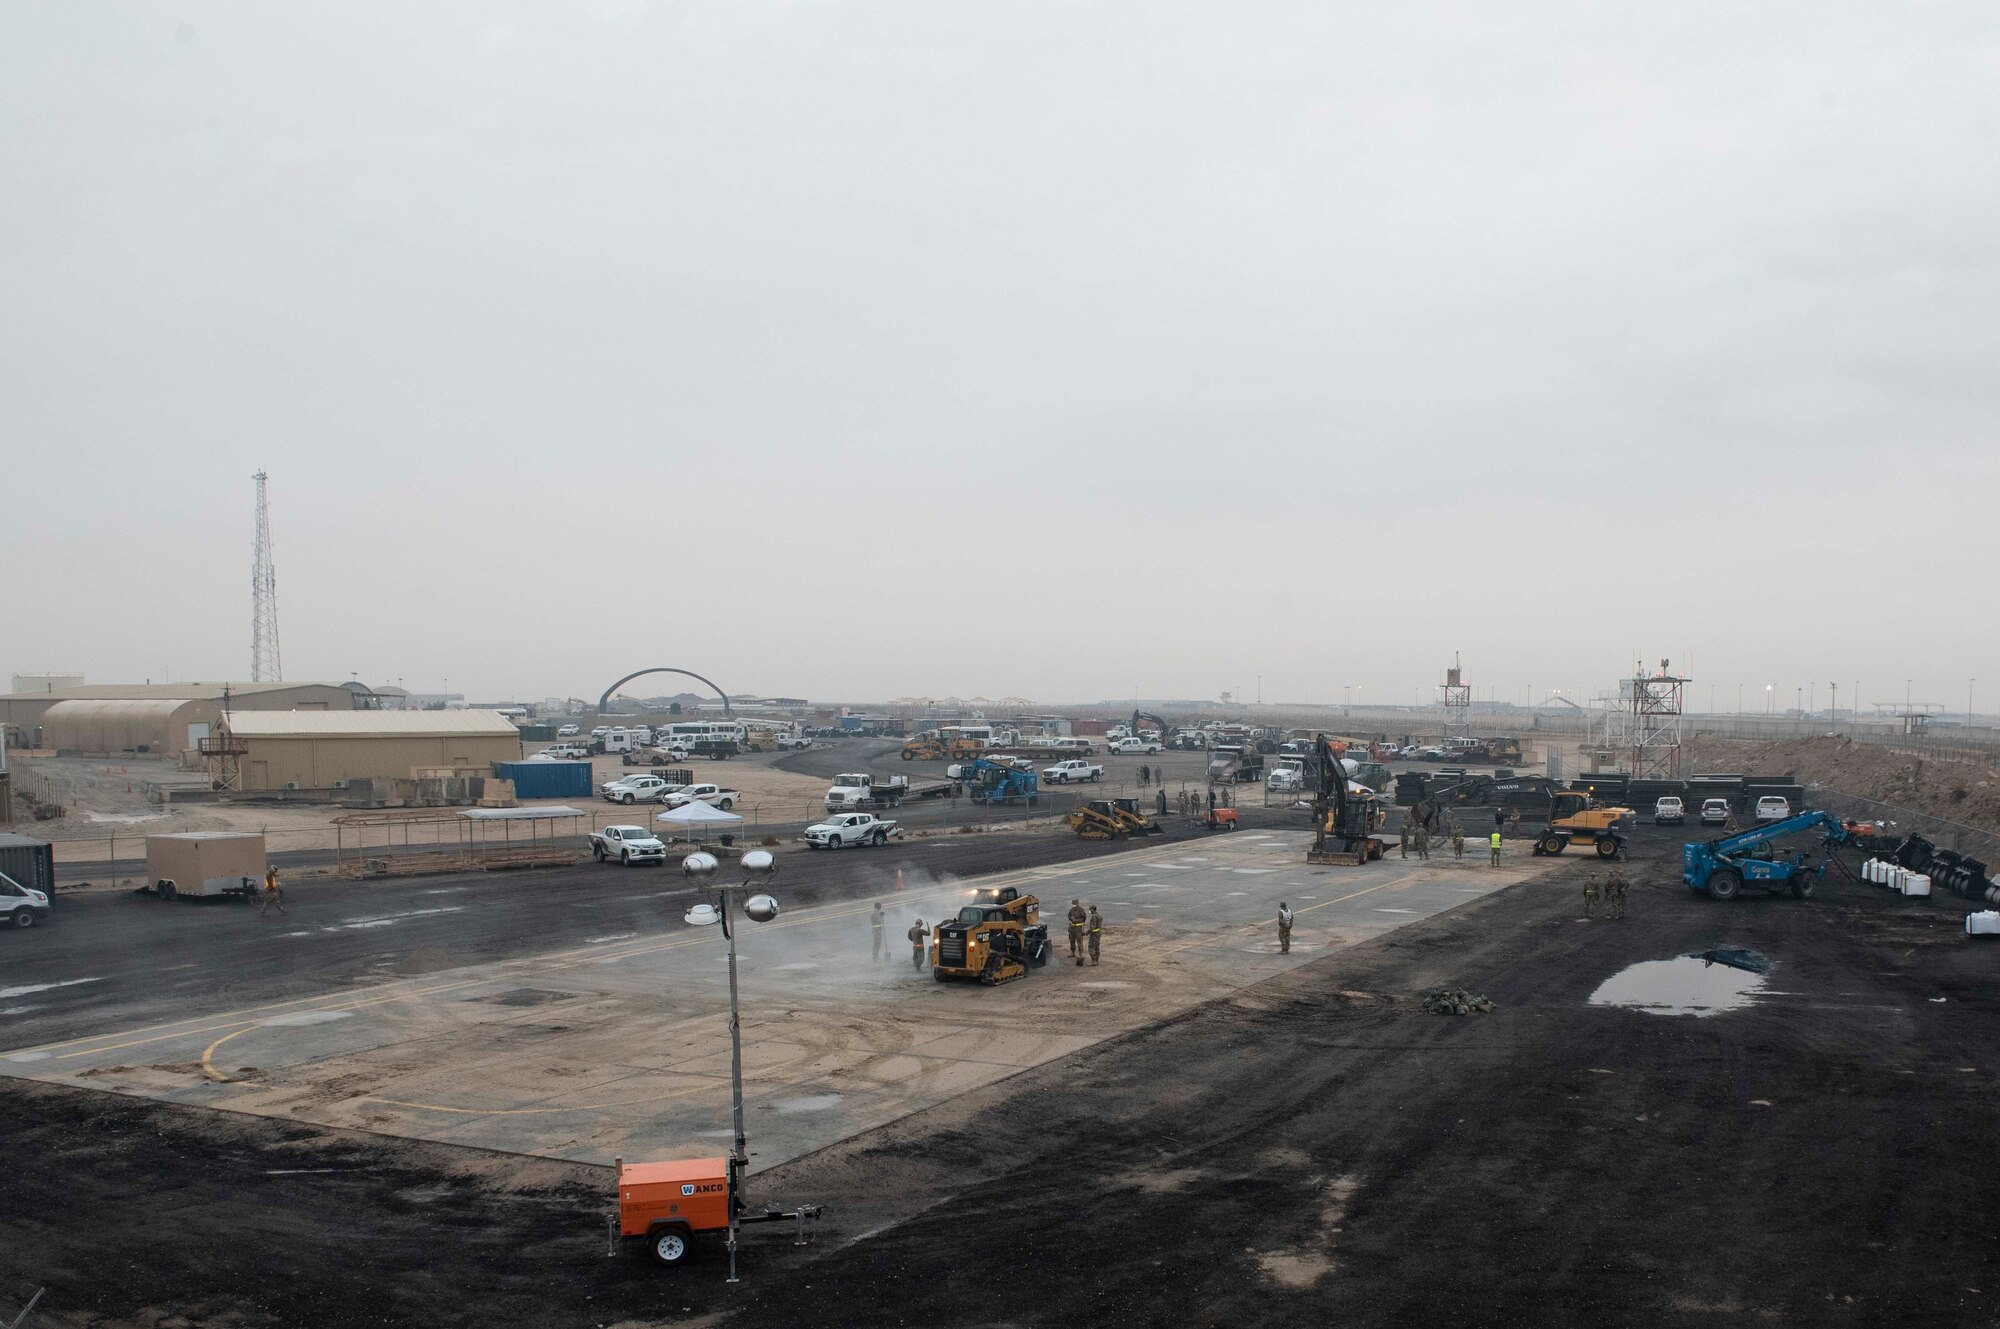 U.S. Air Force Airmen from the 386th Expeditionary Civil Engineer Squadron prepare for a Rapid Airfield Damage Recovery training exercise at Ali Al Salem Air Base, Kuwait, Nov. 16, 2020. During the exercise, multiple craters were repaired in a matter of hours allowing the simulated runway to become active again. (U.S. Air Force photo by Staff Sgt. Kenneth Boyton)